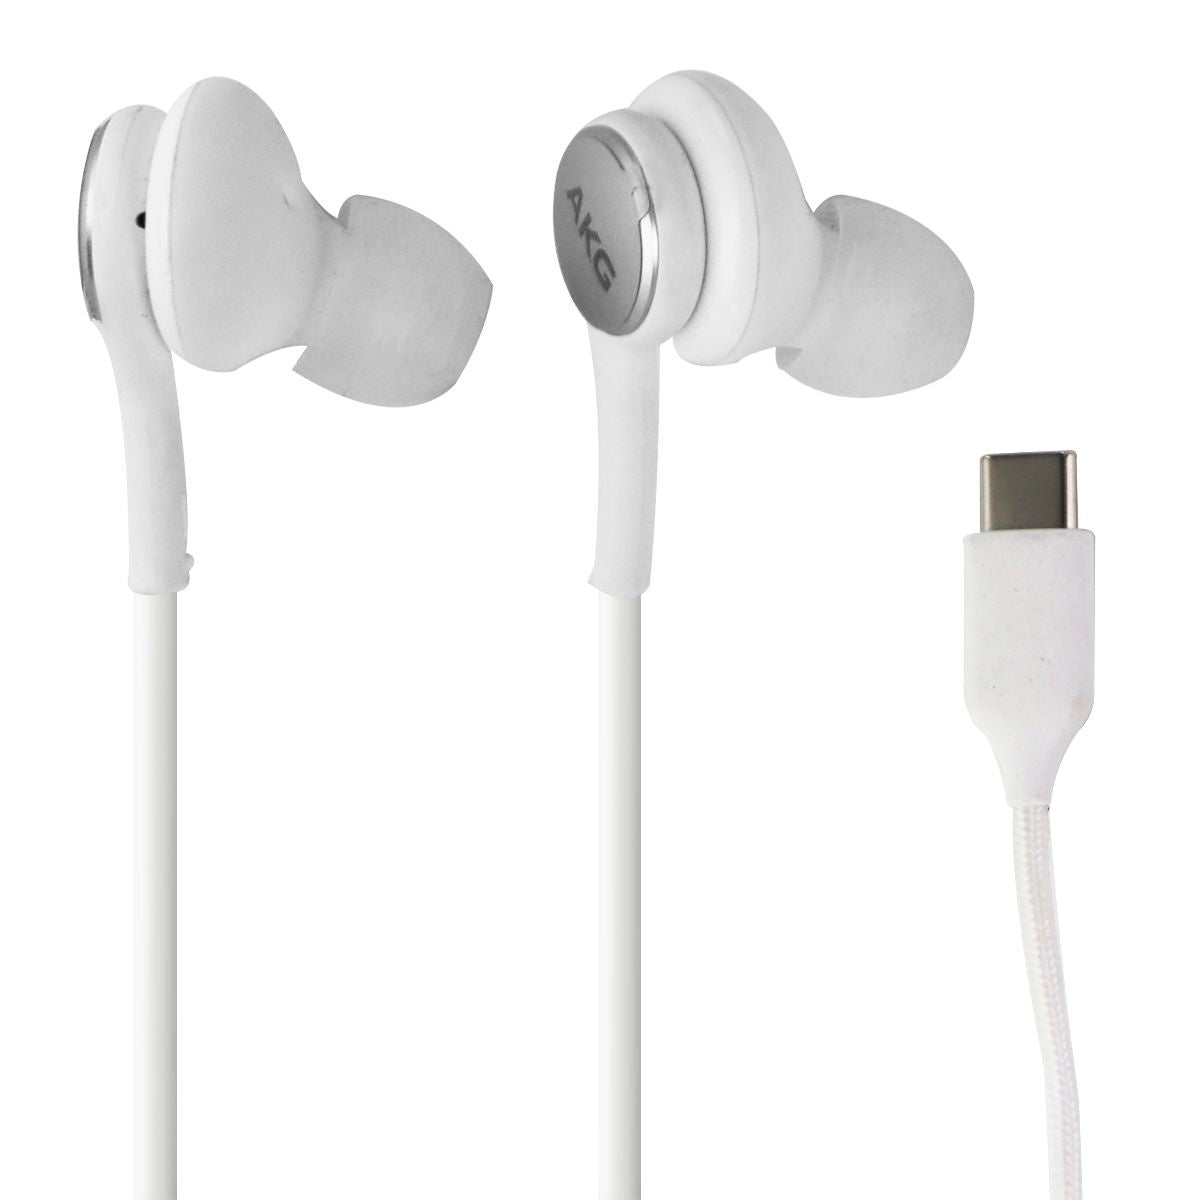 Samsung AKG Stereo Earbud Headphones with USB-C Connector - White Portable Audio - Headphones Samsung    - Simple Cell Bulk Wholesale Pricing - USA Seller